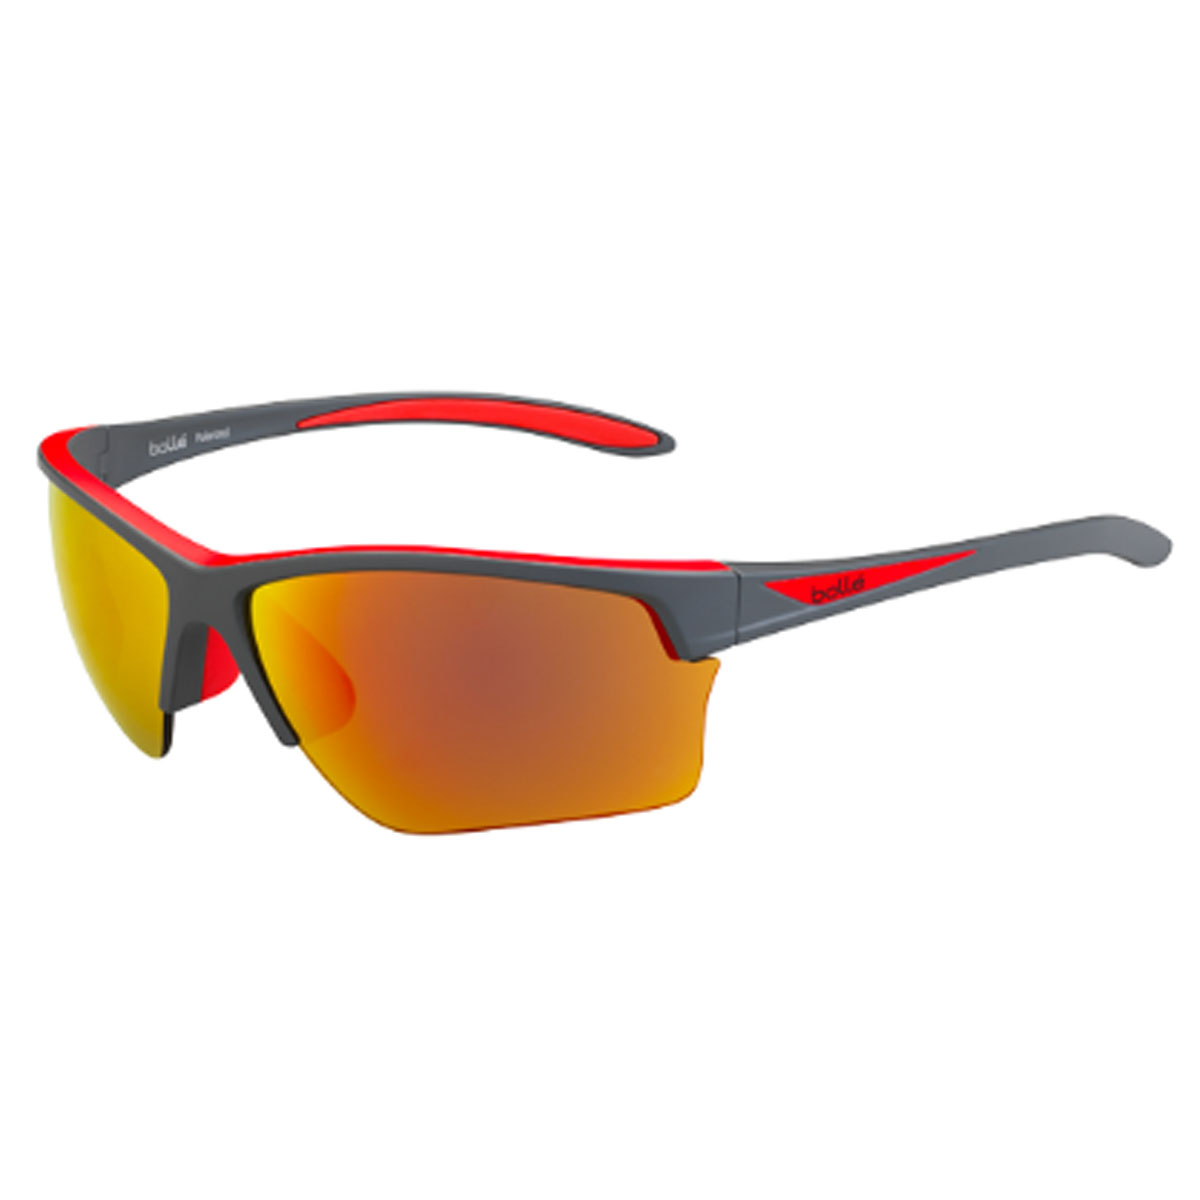 Flash Matte Grey Red 12208 Sunglasses Polarized Fire Lens M Thermogrip - image 1 of 1